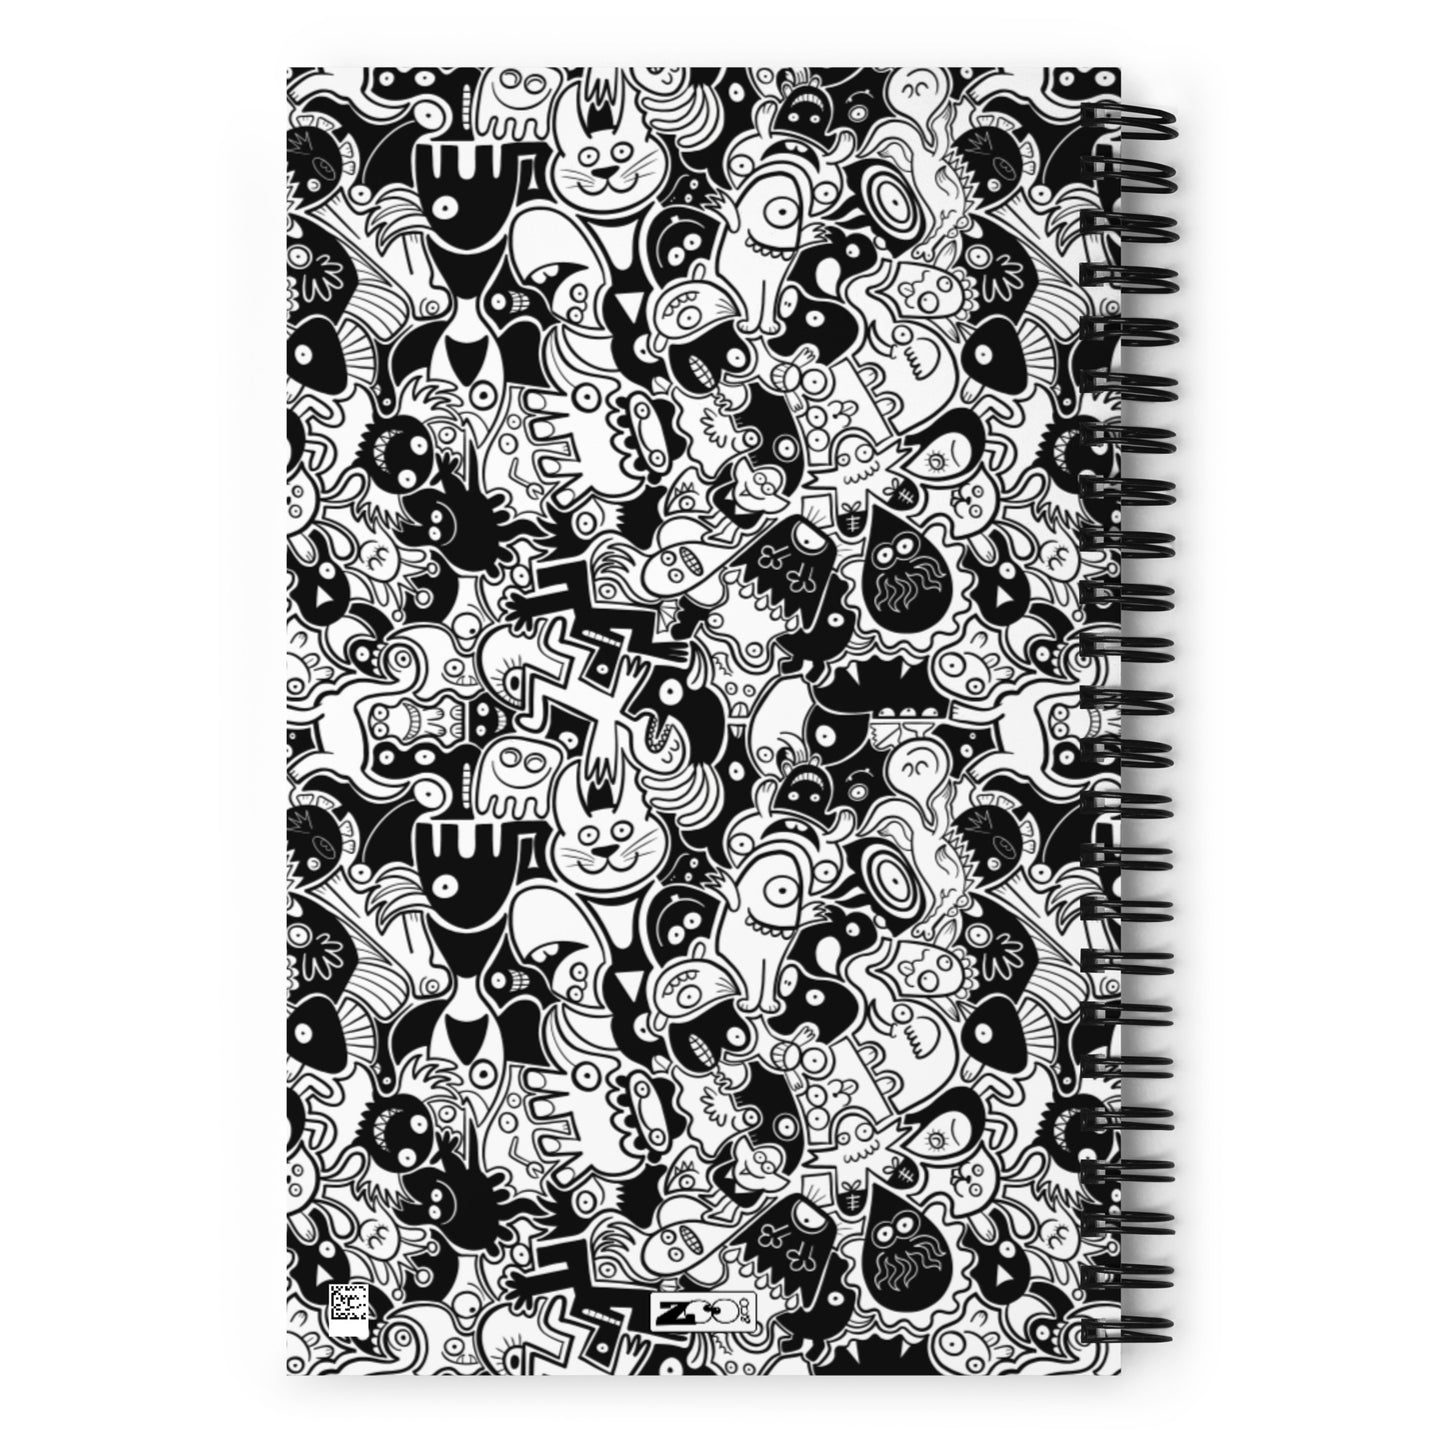 Joyful crowd of black and white doodle creatures Spiral notebook. Back view